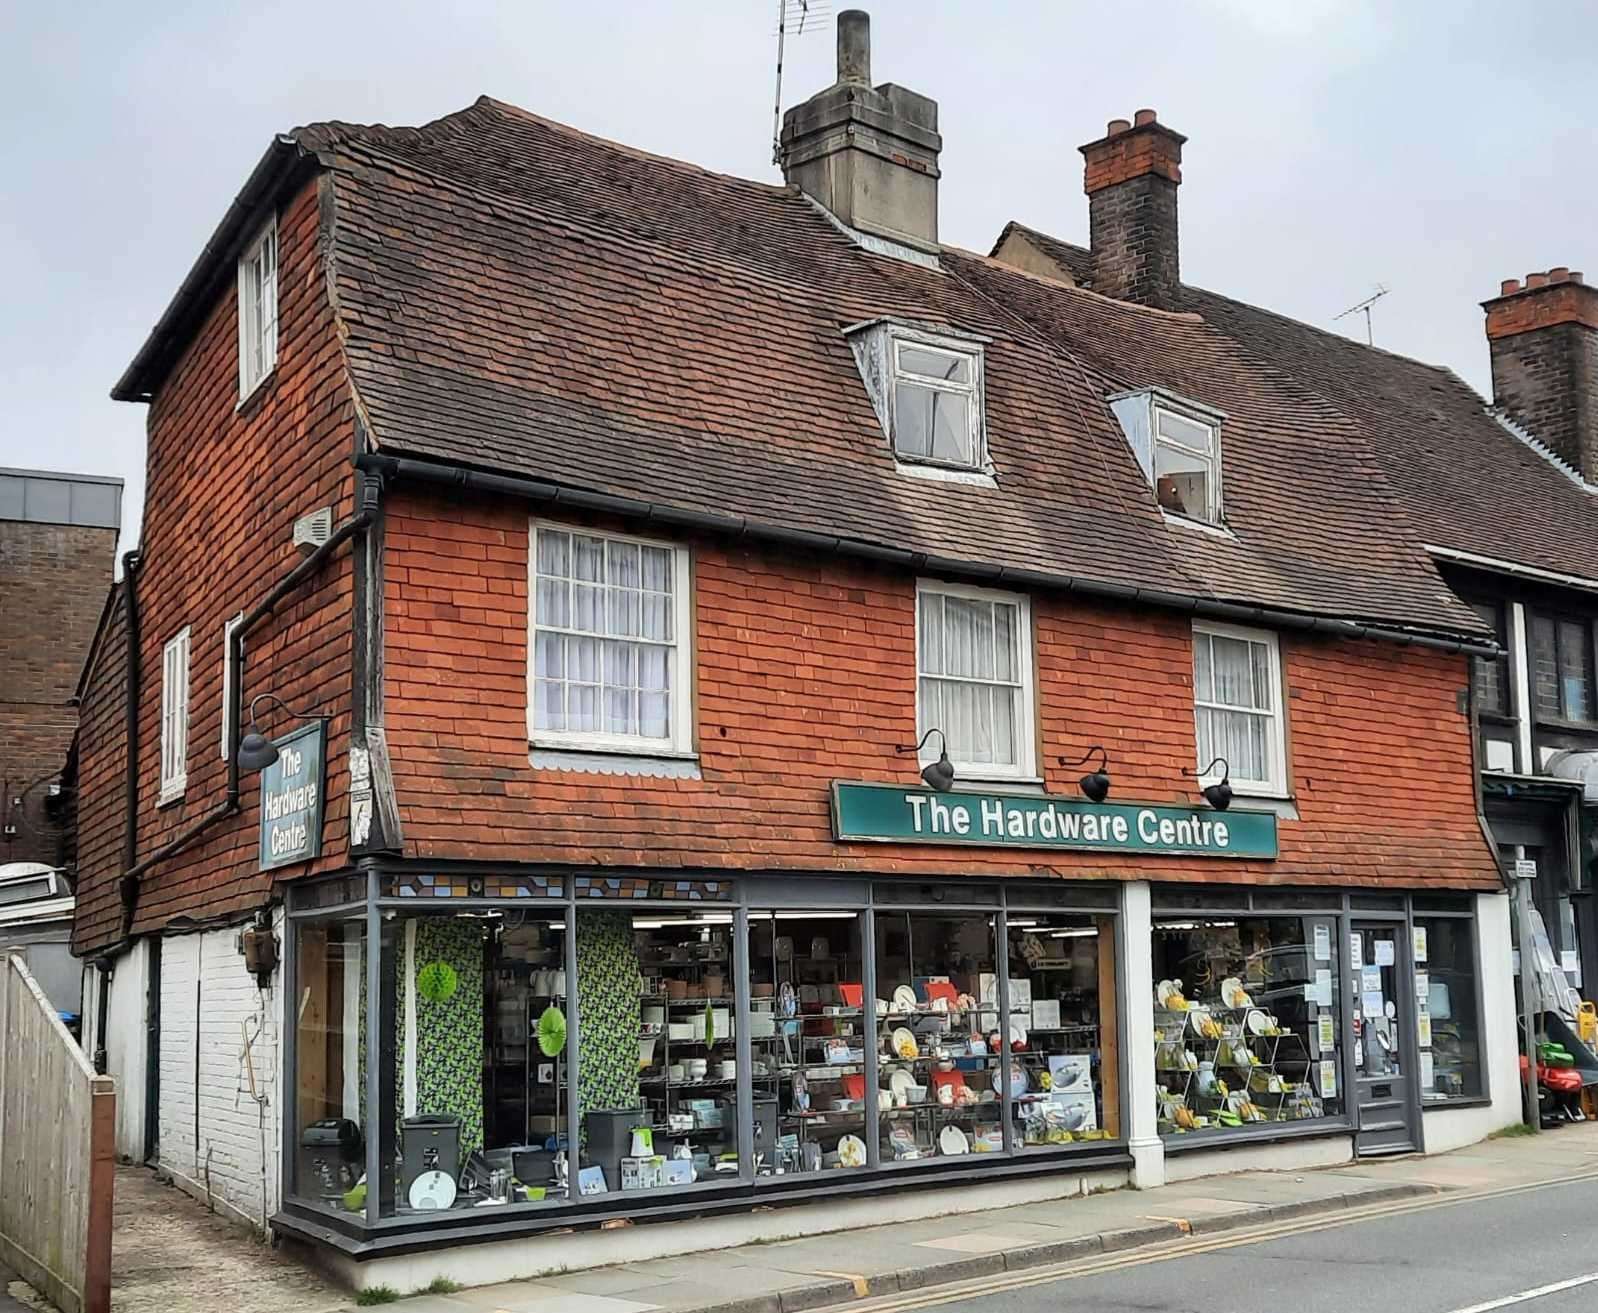 The store has served customers for more than 50 years. Picture: Paul's Property Maintenance